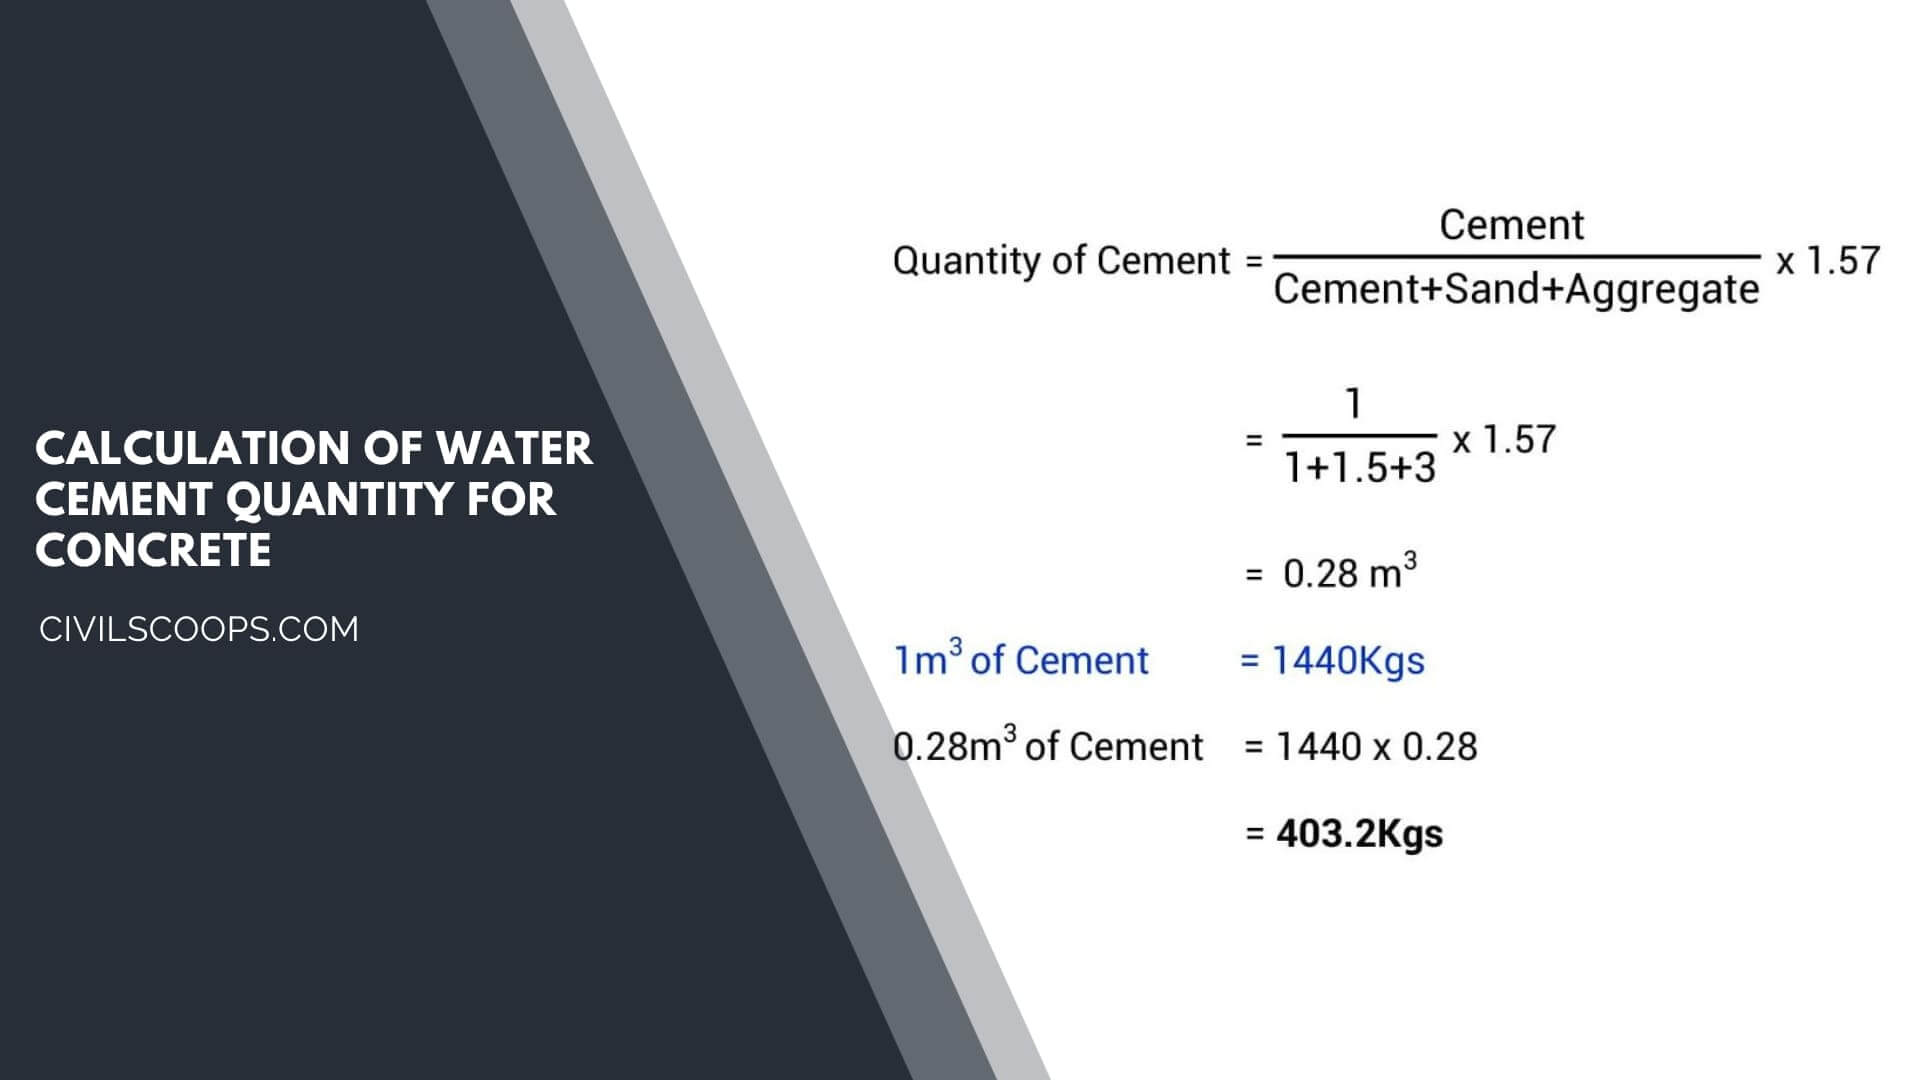 Calculation of Water Cement Quantity for Concrete